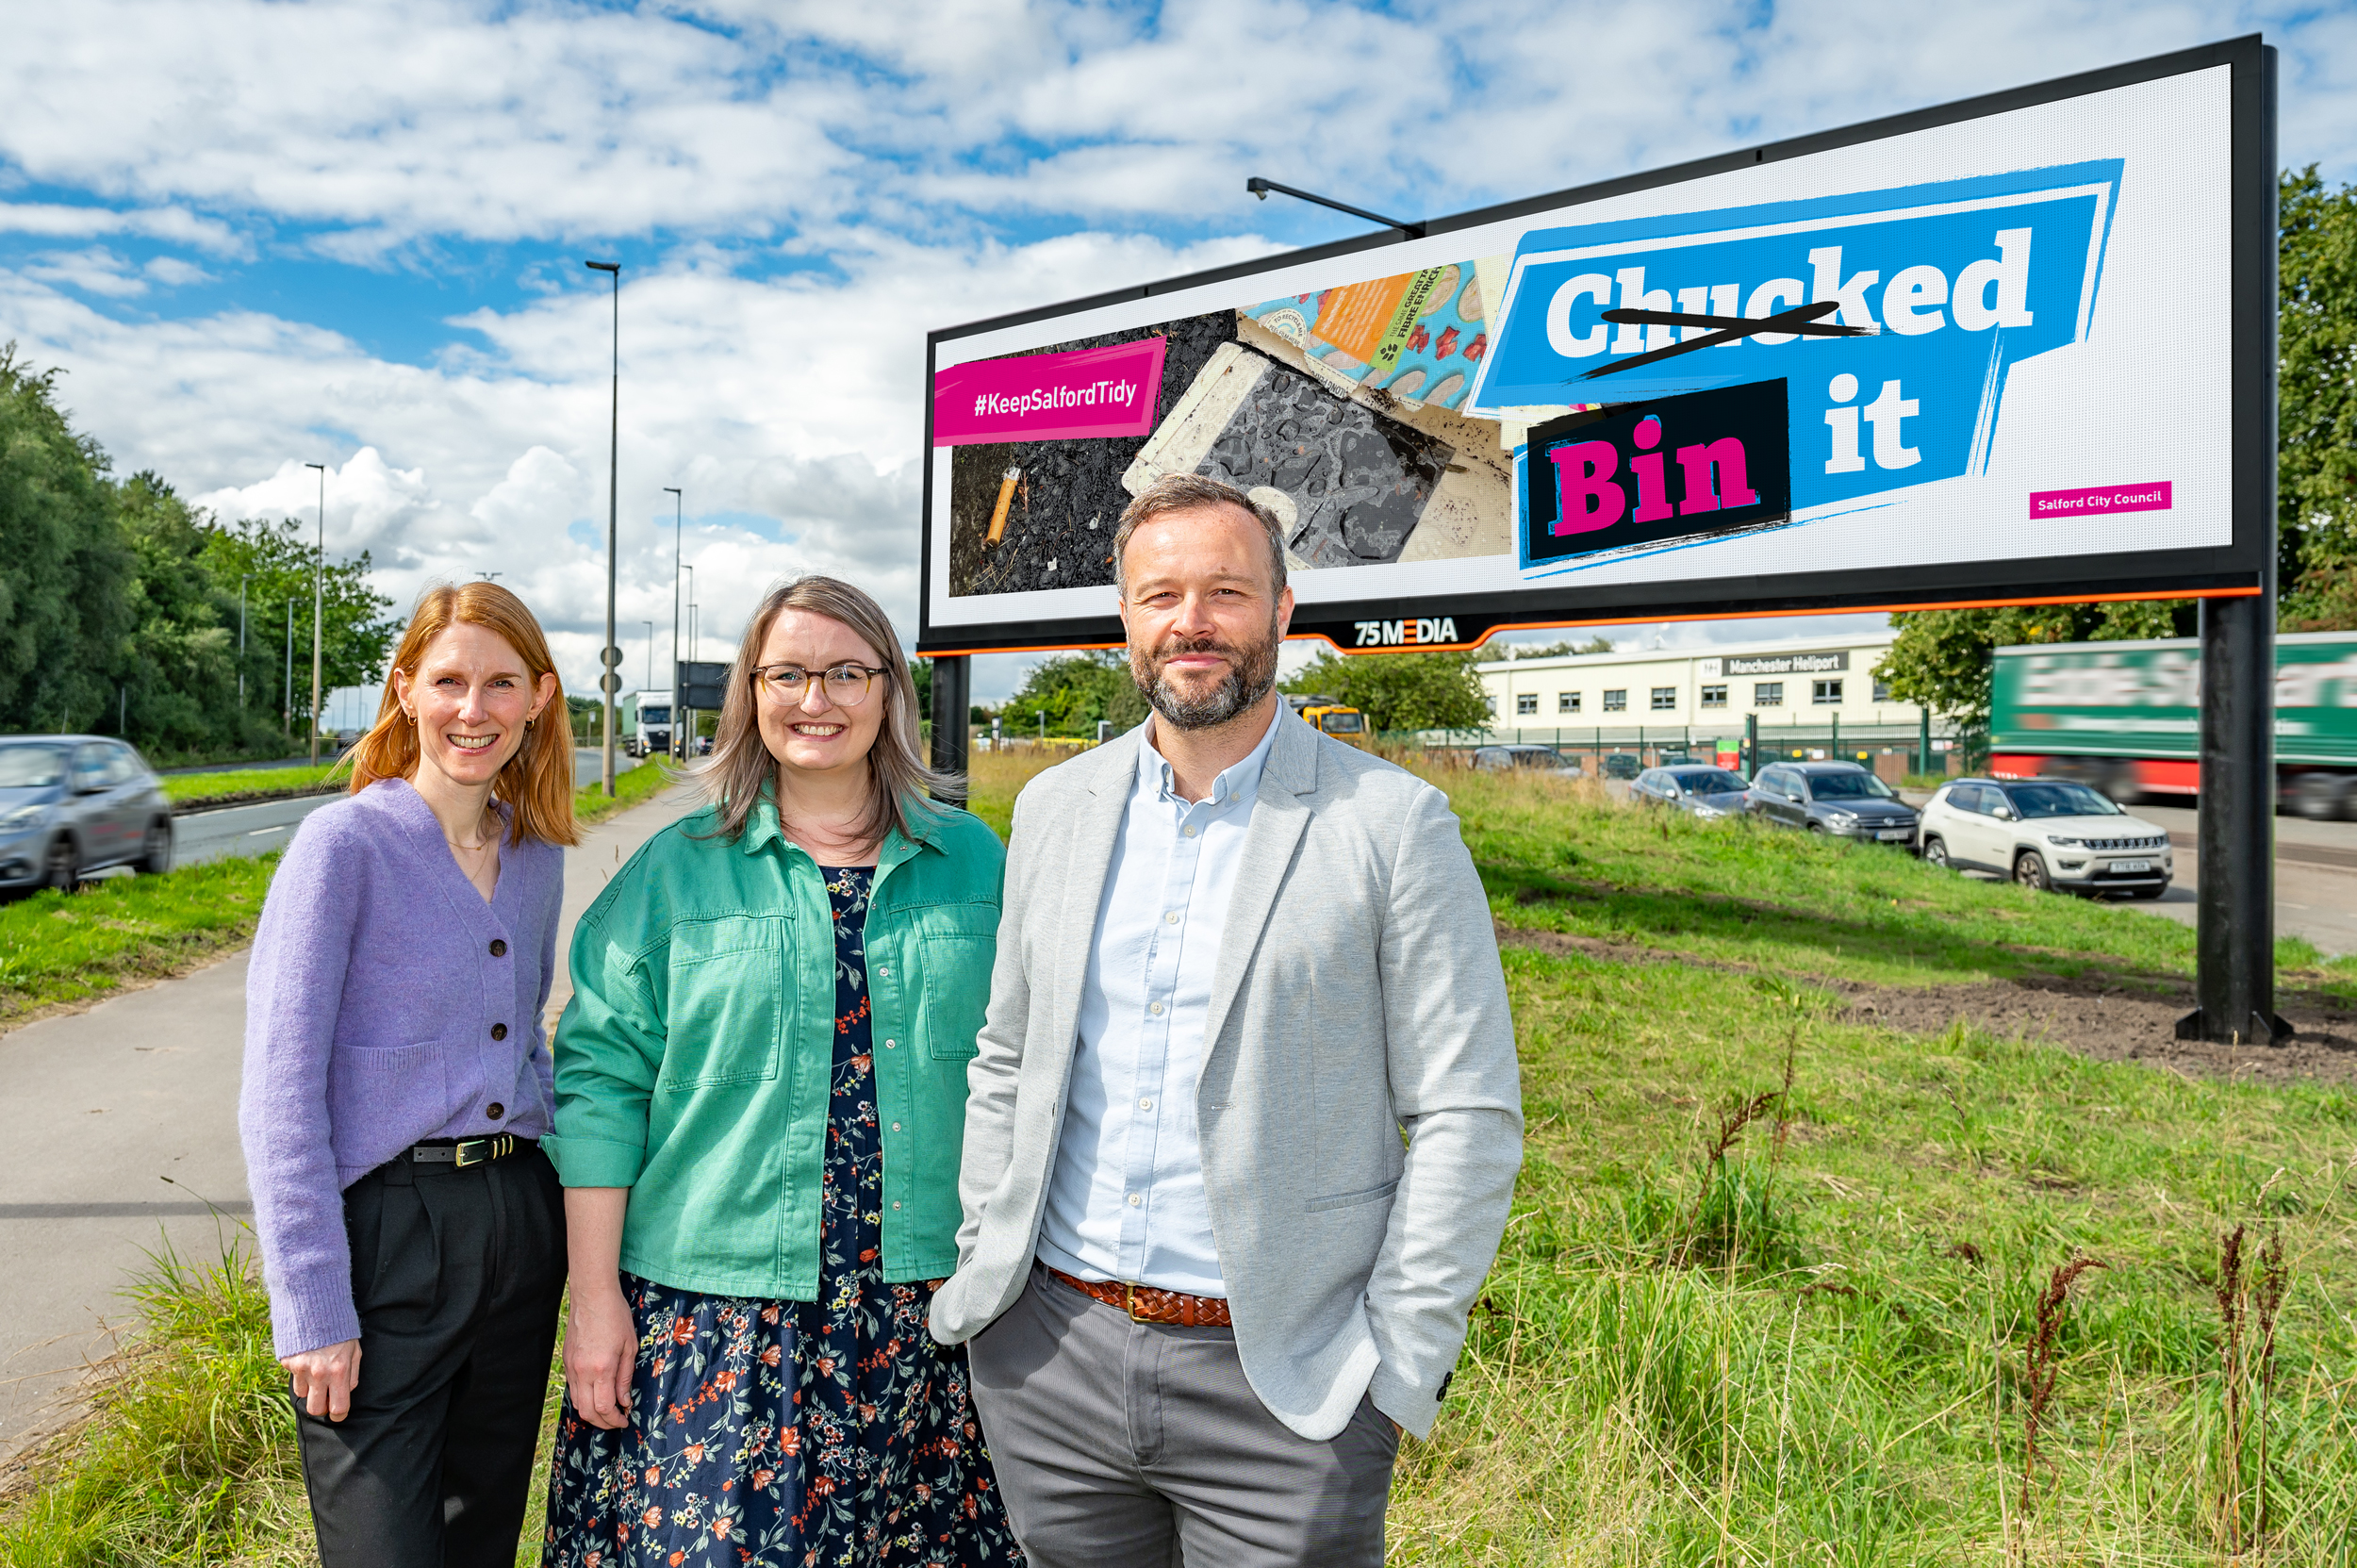 (L-R) Katy Conway, 75Media; Councillor Hannah Robinson-Smith, Salford City Council;  Mike Duty, Wildstone, at one of the new Salford digital billboard sites